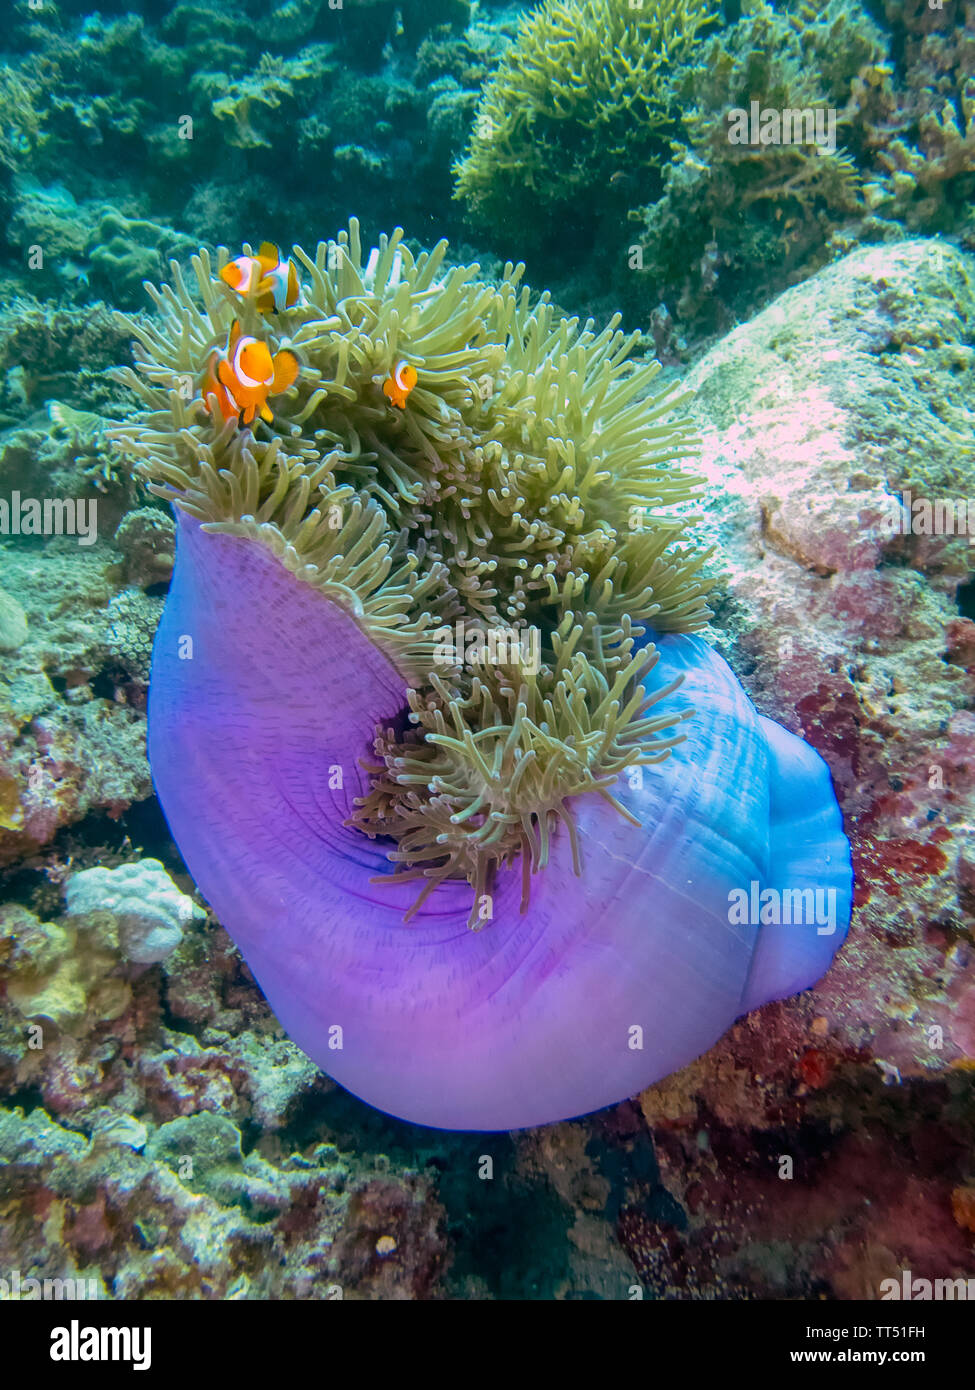 A Magnificent Anemone (Heteractis magnifica) Stock Photo